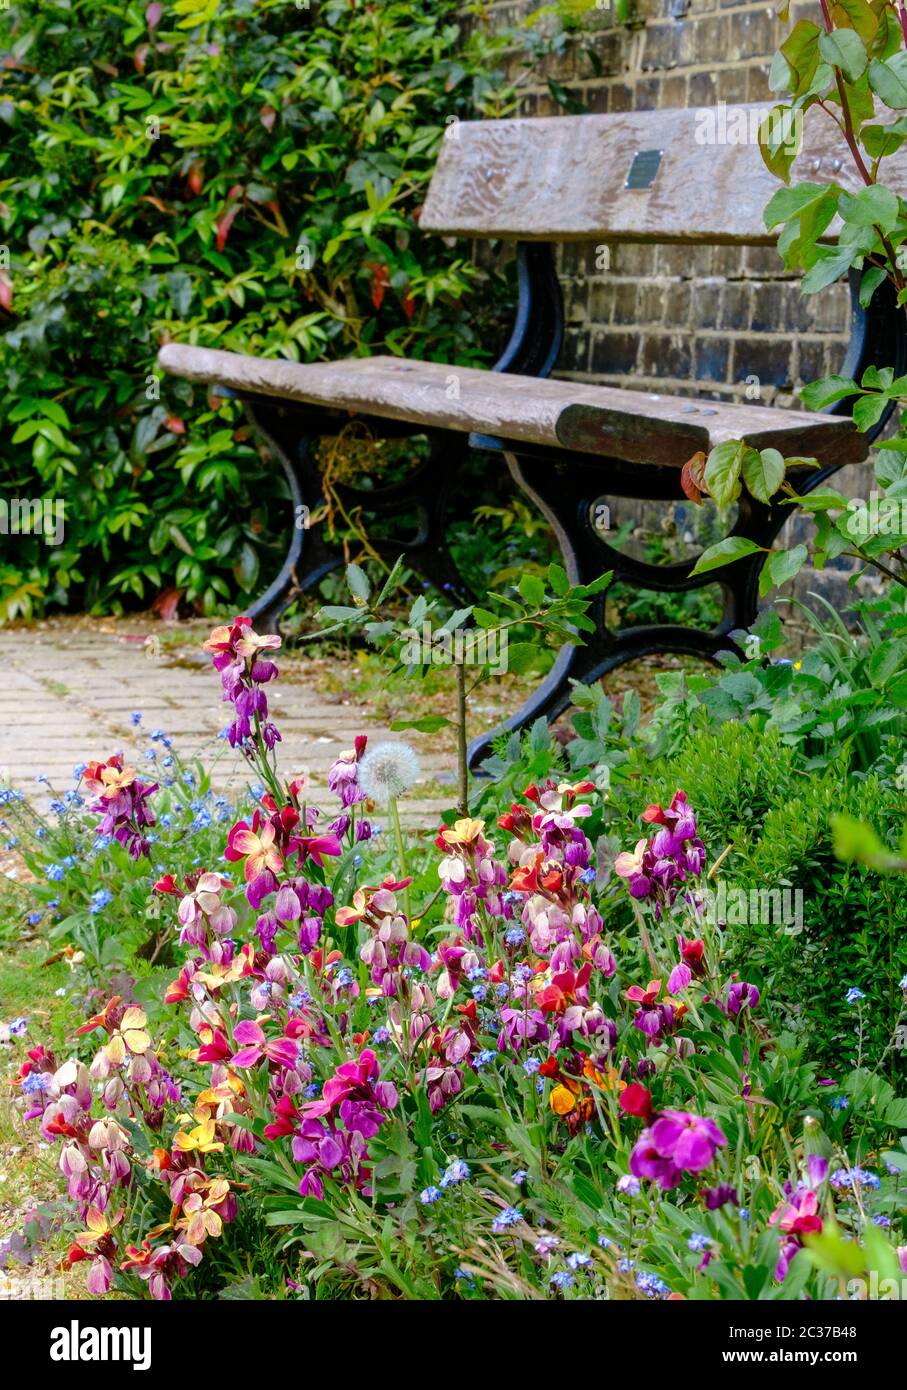 Wooden park bench in front of brick wall with green shrubs next to it & a patch of wild flowers in front including forget me nots  & wall flowers. Stock Photo